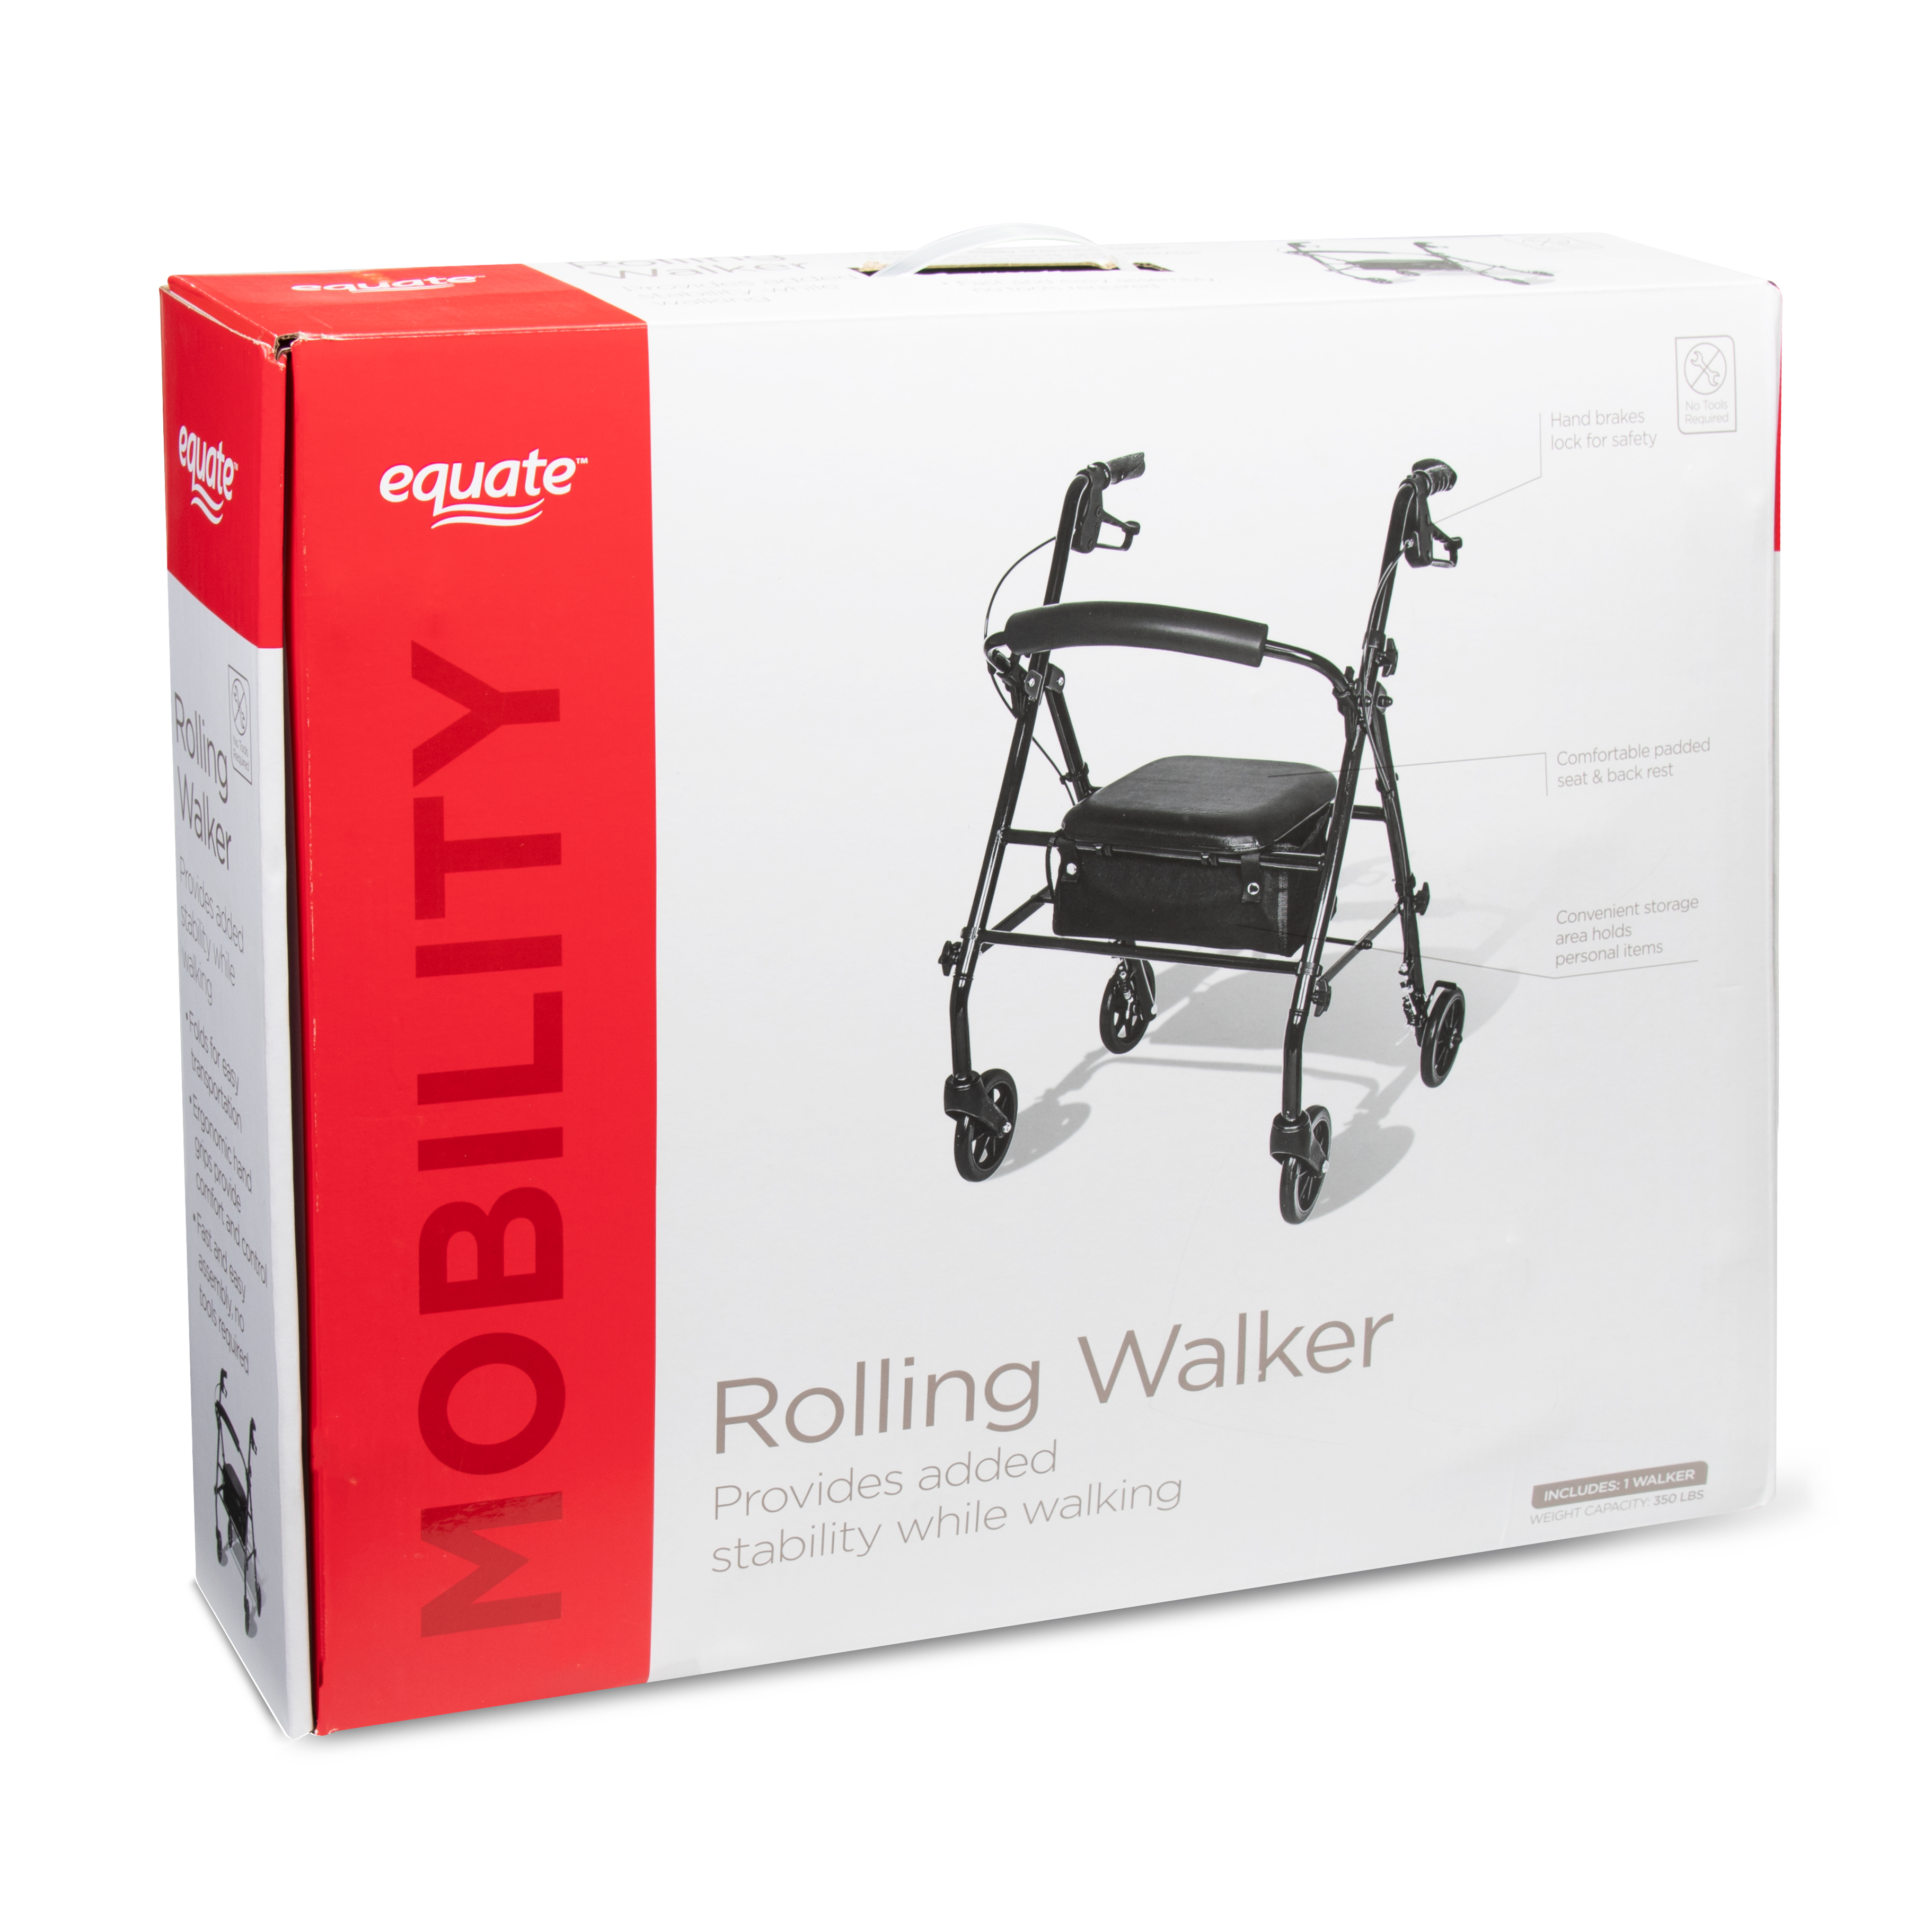 Equate Rolling Walker for Seniors, Rollator with Seat and Wheels, Black, 350 lb Capacity - image 5 of 9